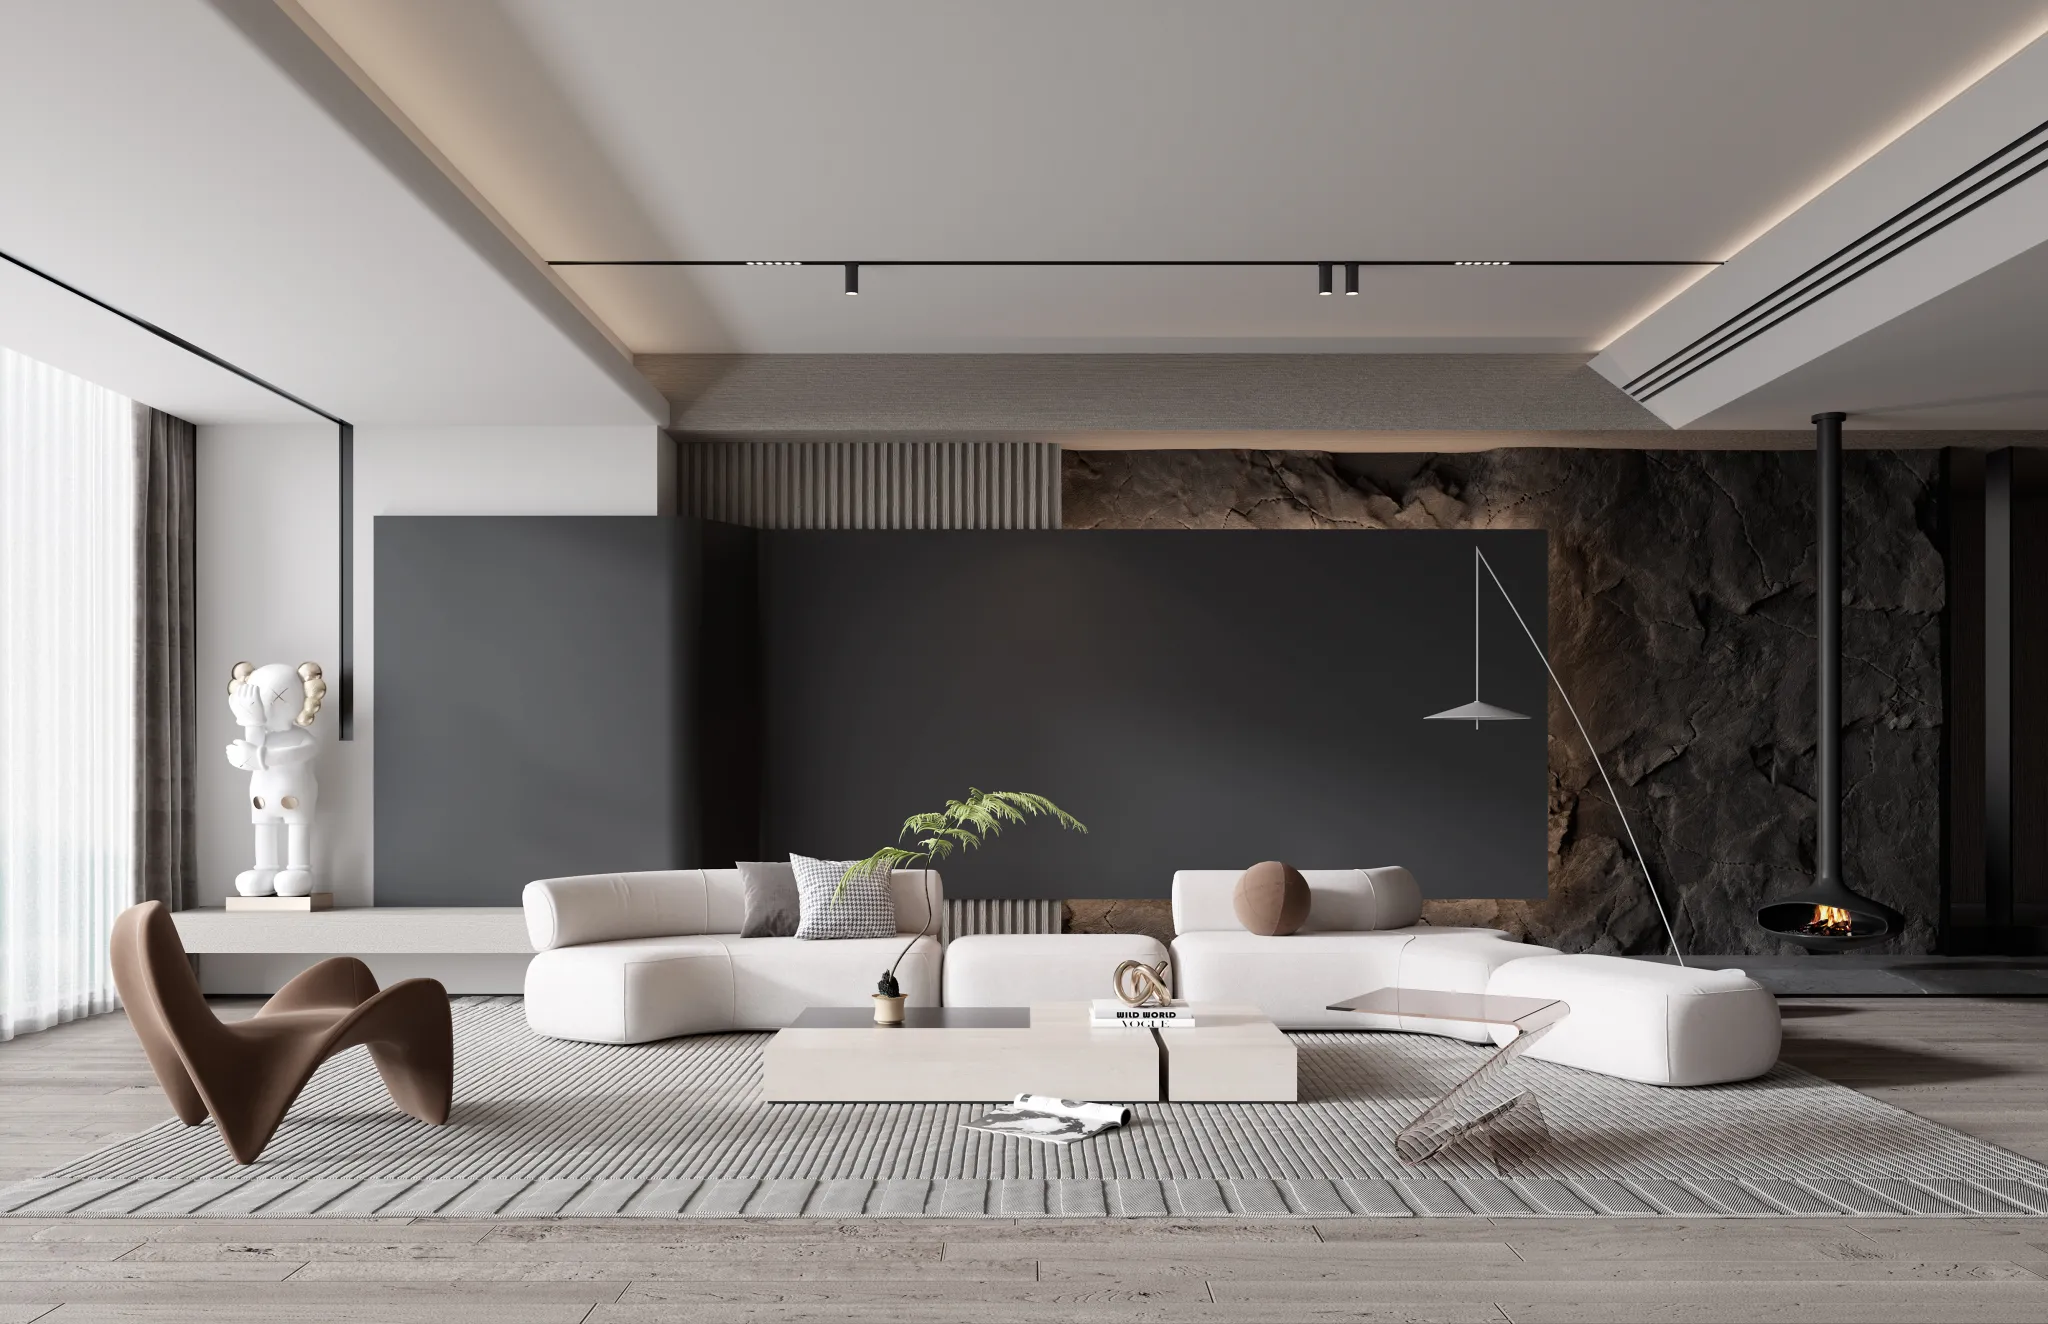 HOUSE SPACE 3D SCENES – LIVING ROOM – 0127